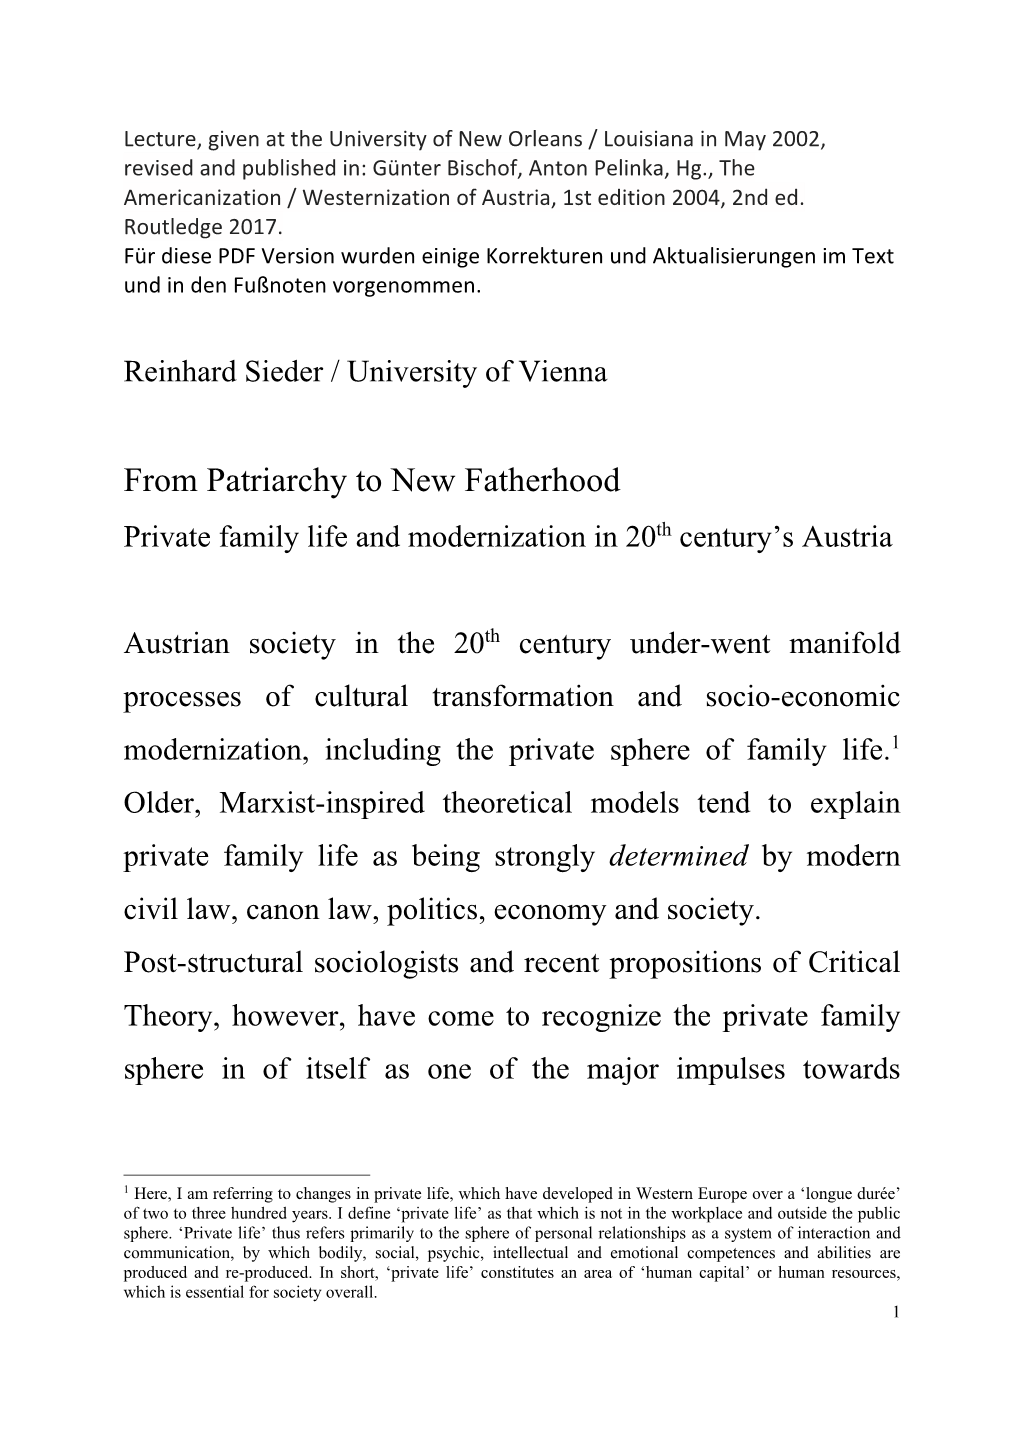 From Patriarchy to New Fatherhood Private Family Life and Modernization in 20Th Century’S Austria